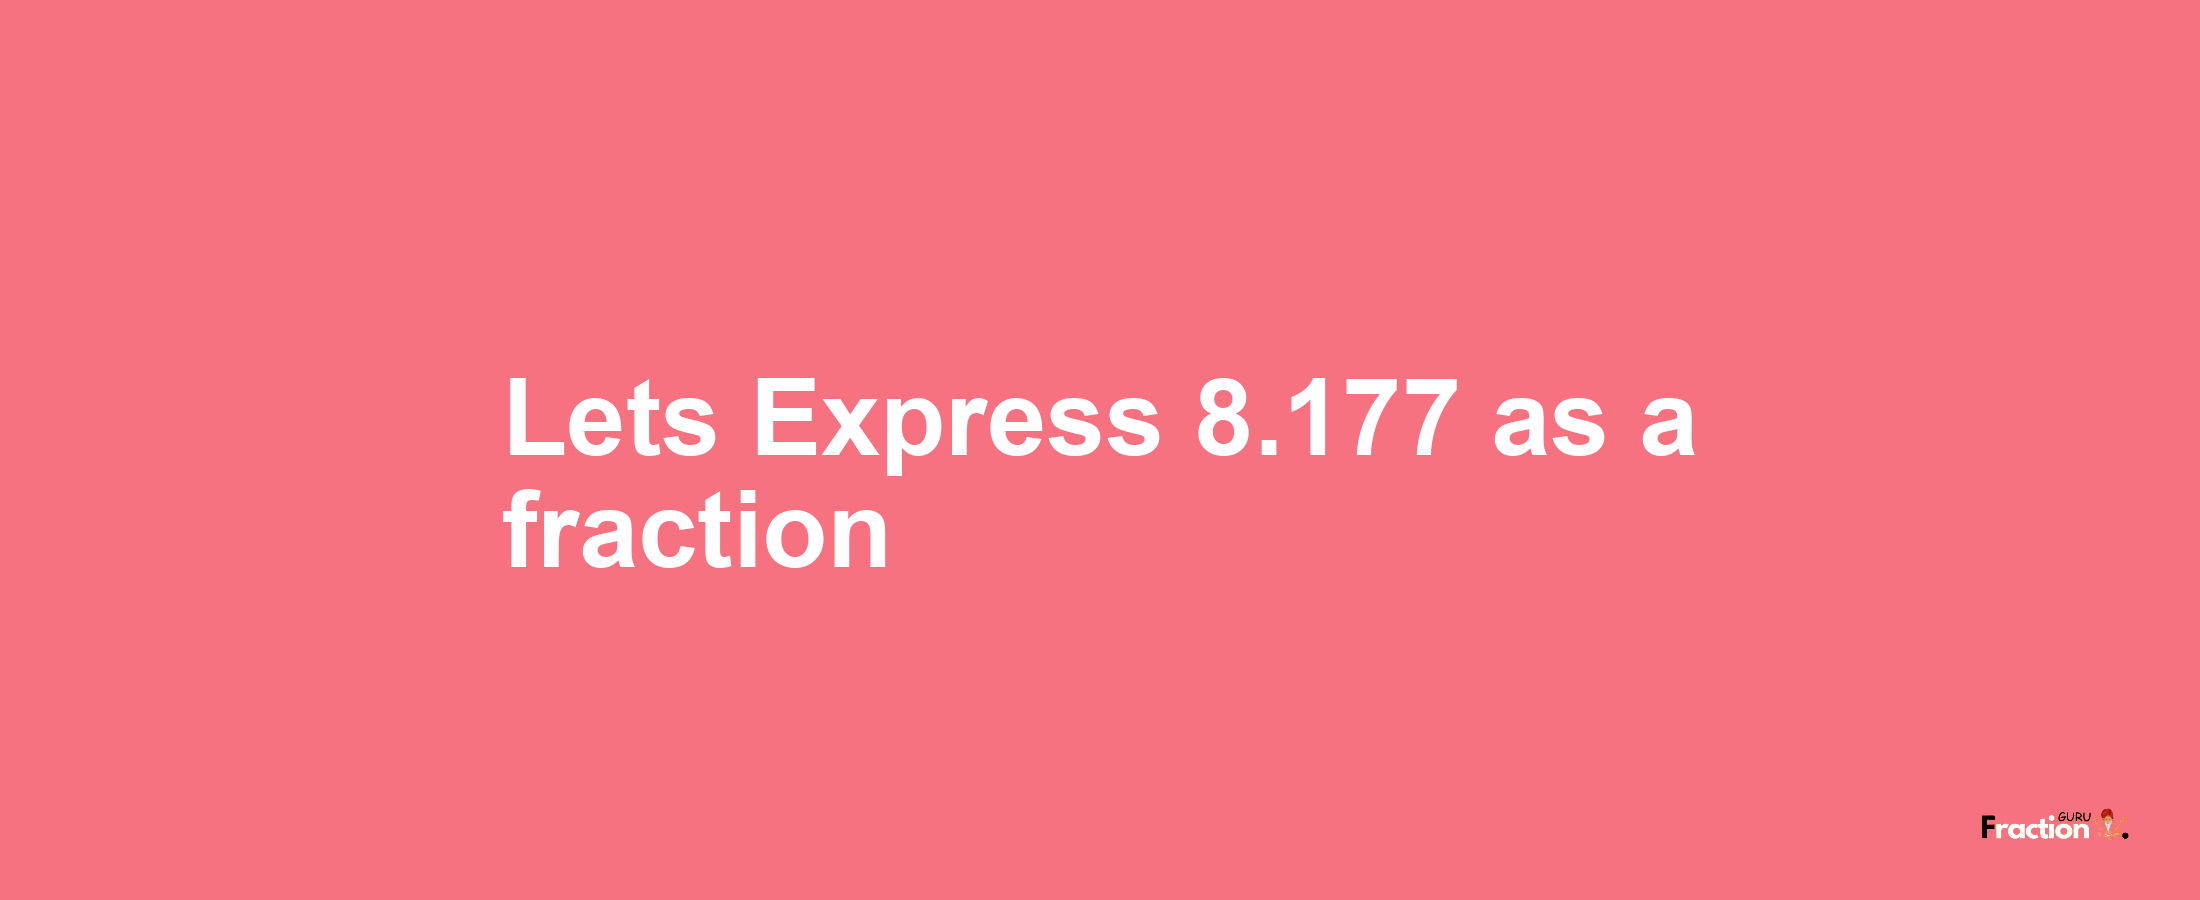 Lets Express 8.177 as afraction